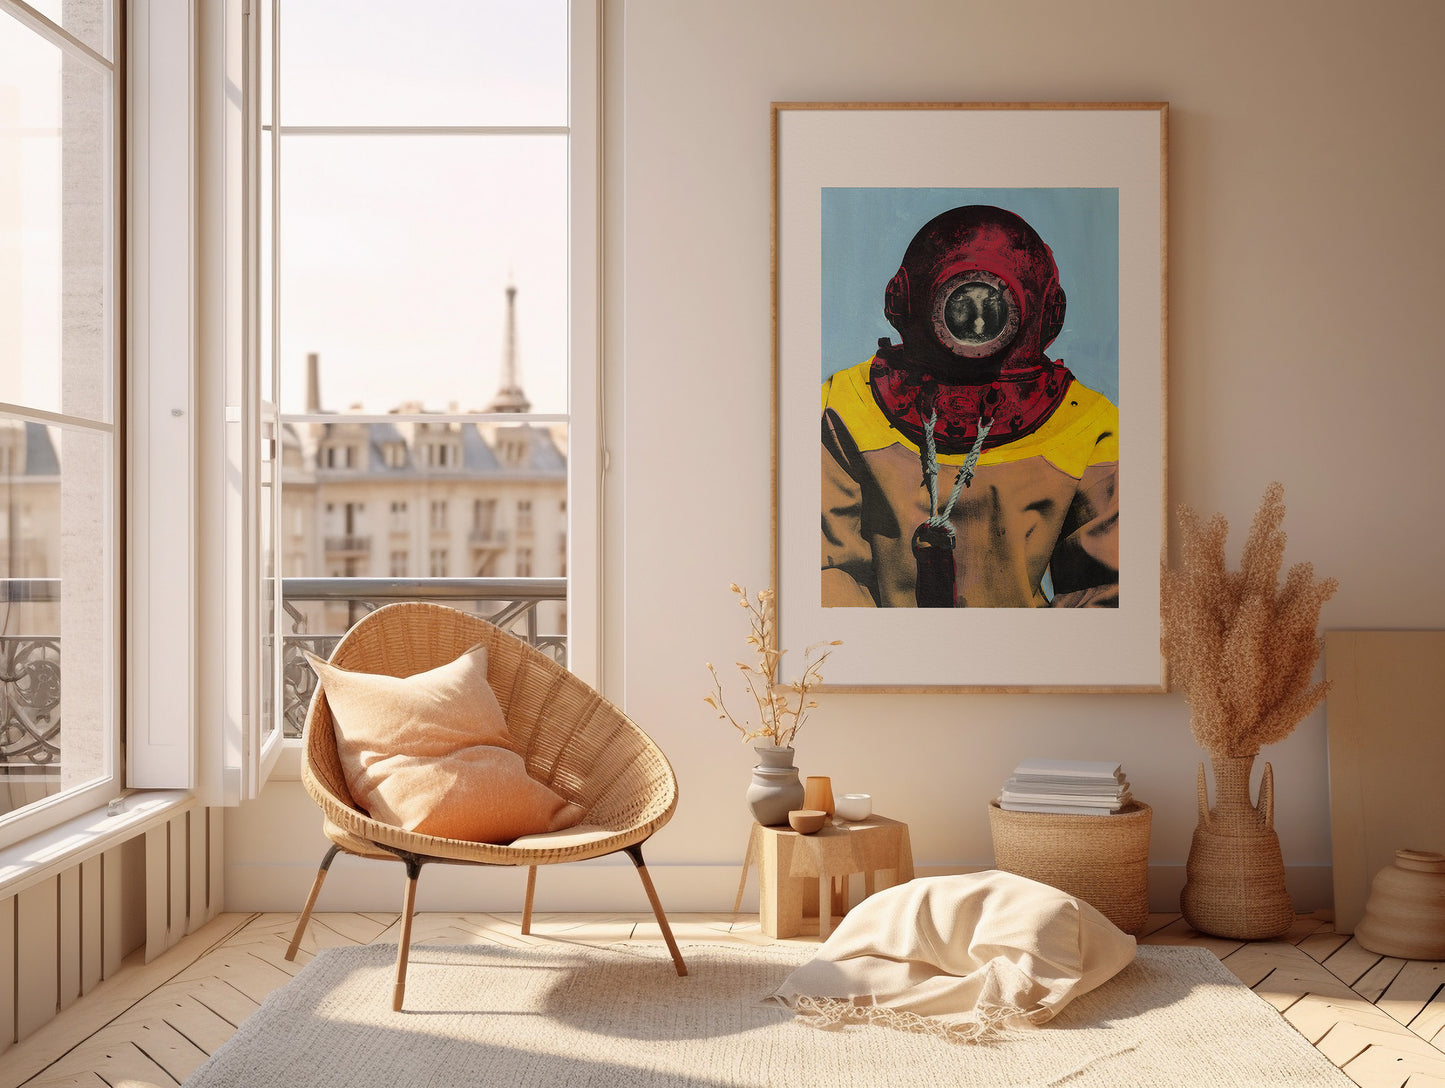 Painting Pop Art Wall Art from Greece | Baby blue & red sponge diver from Kalymnos island, by George Tatakis - inside a room in Paris